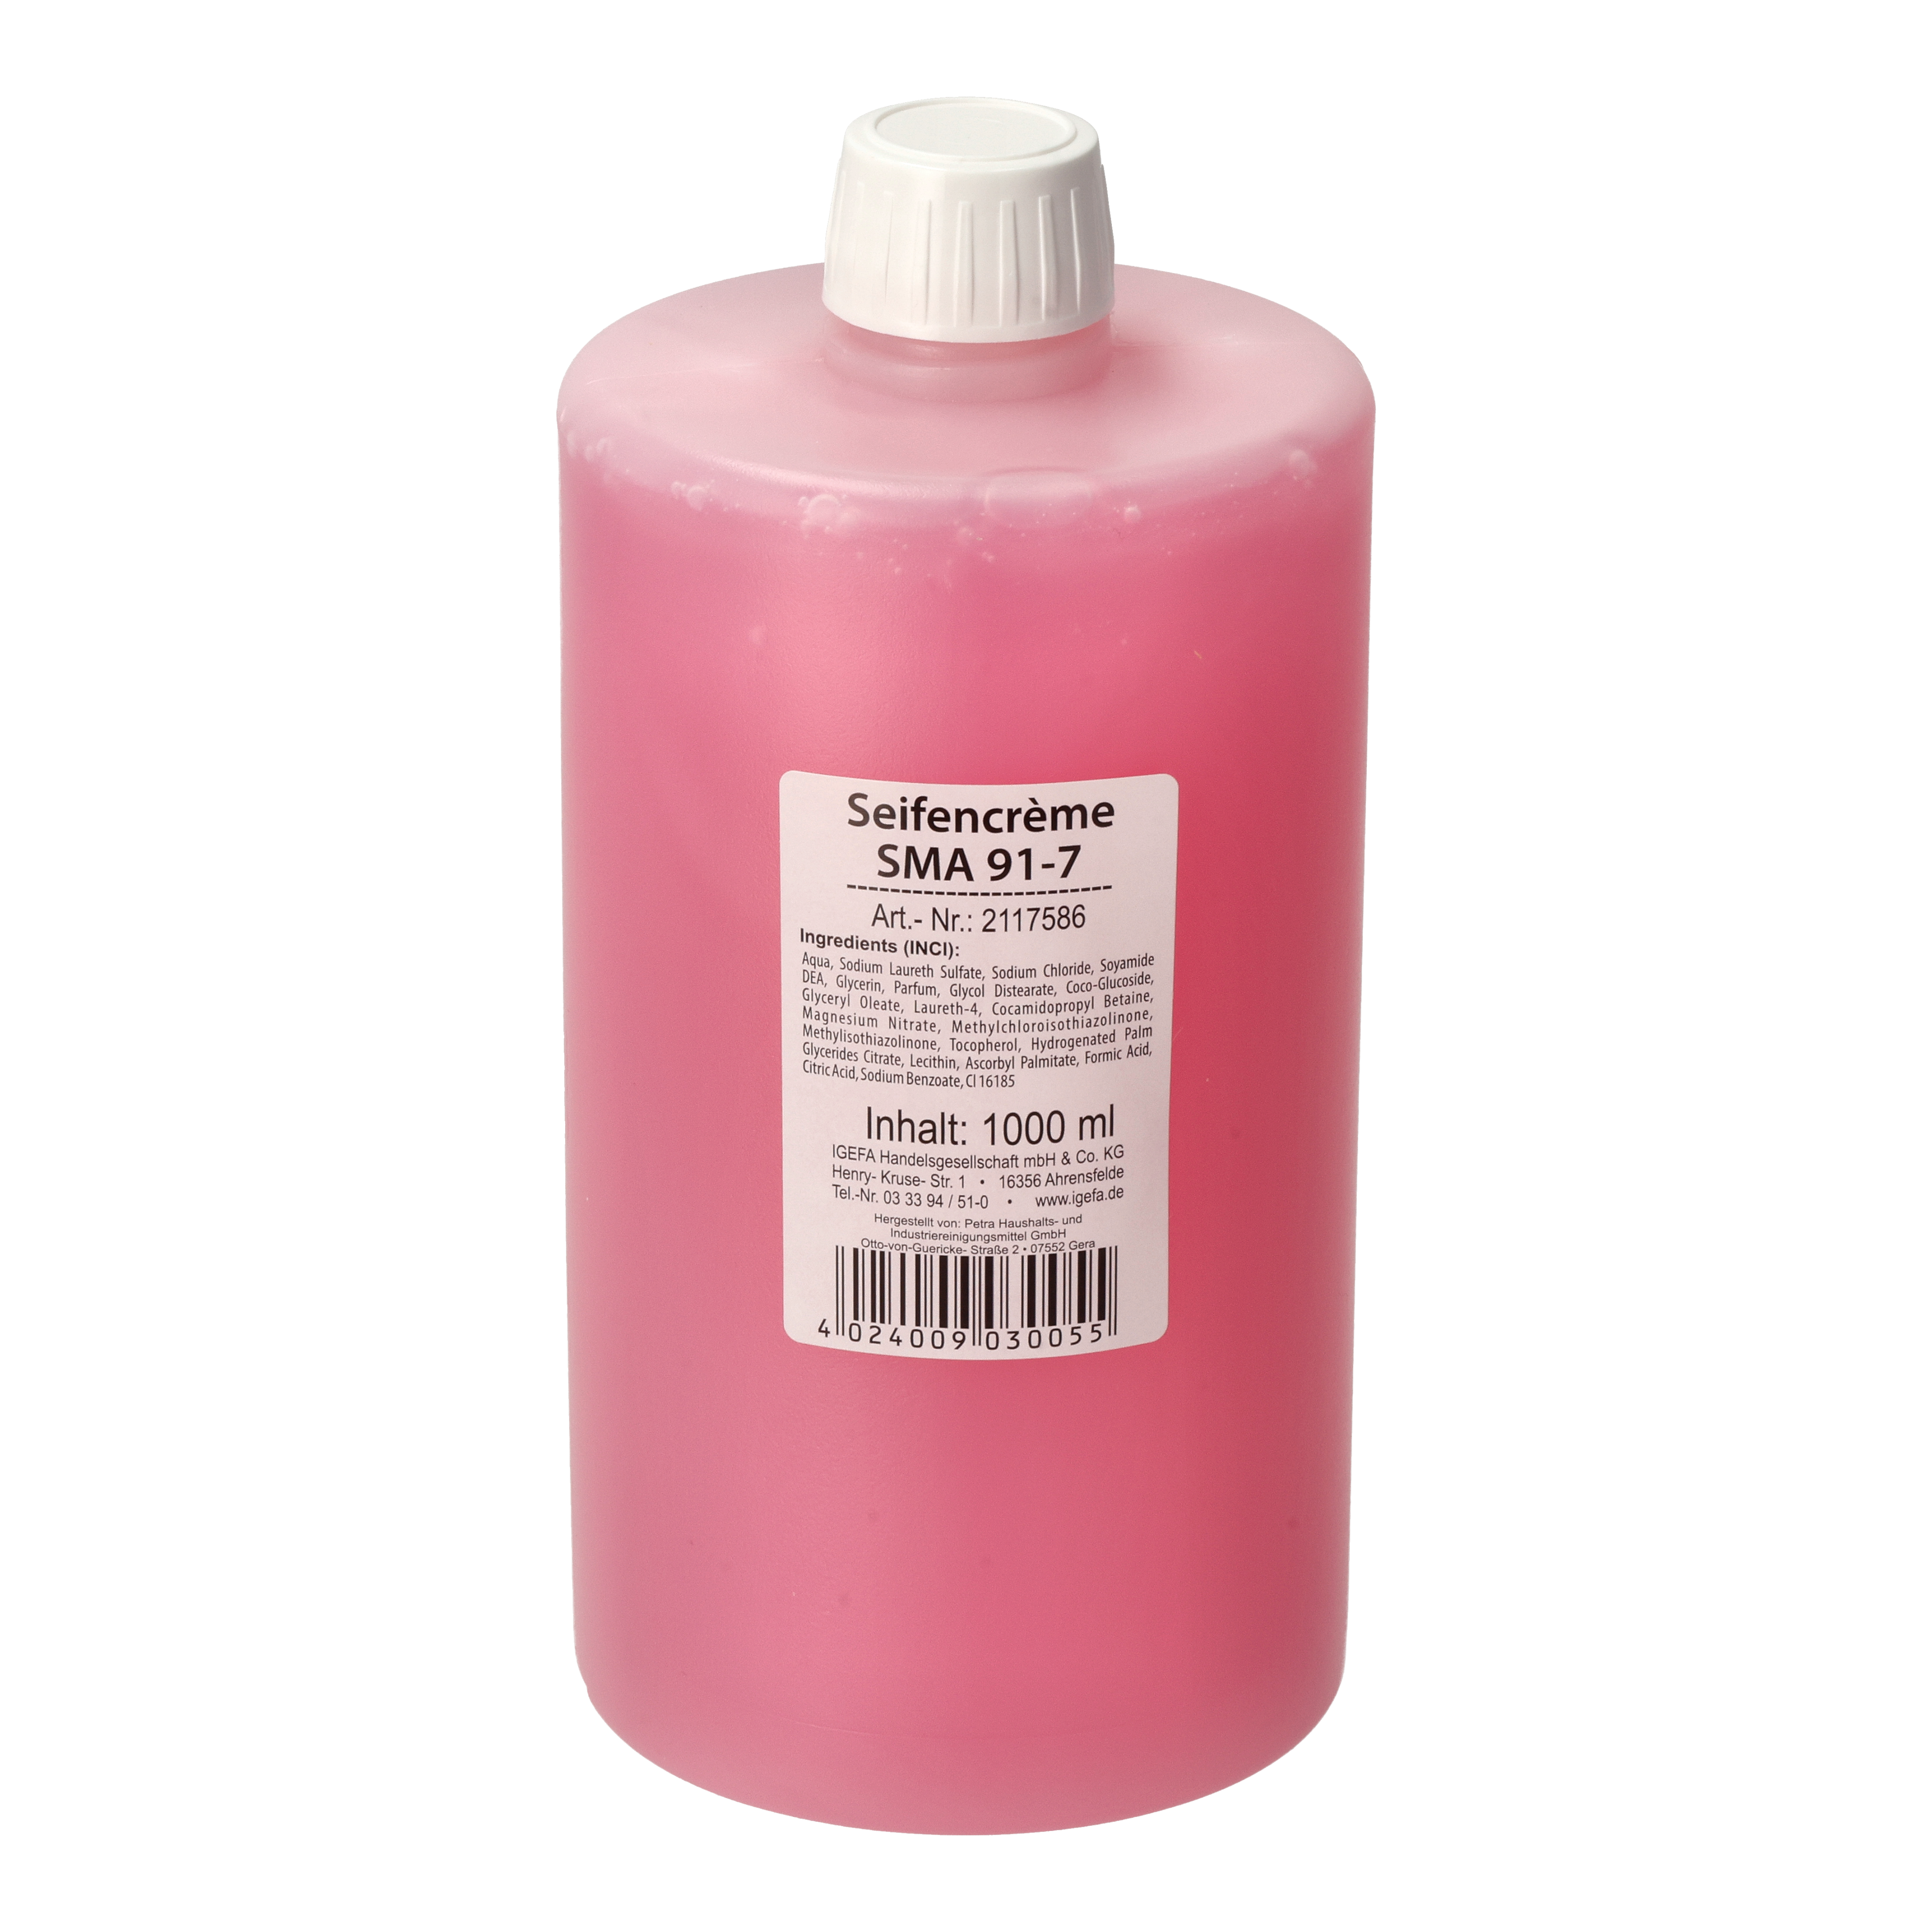 CLEAN and CLEVER SMART Seifencreme SMA91-7 - 6x1 Liter